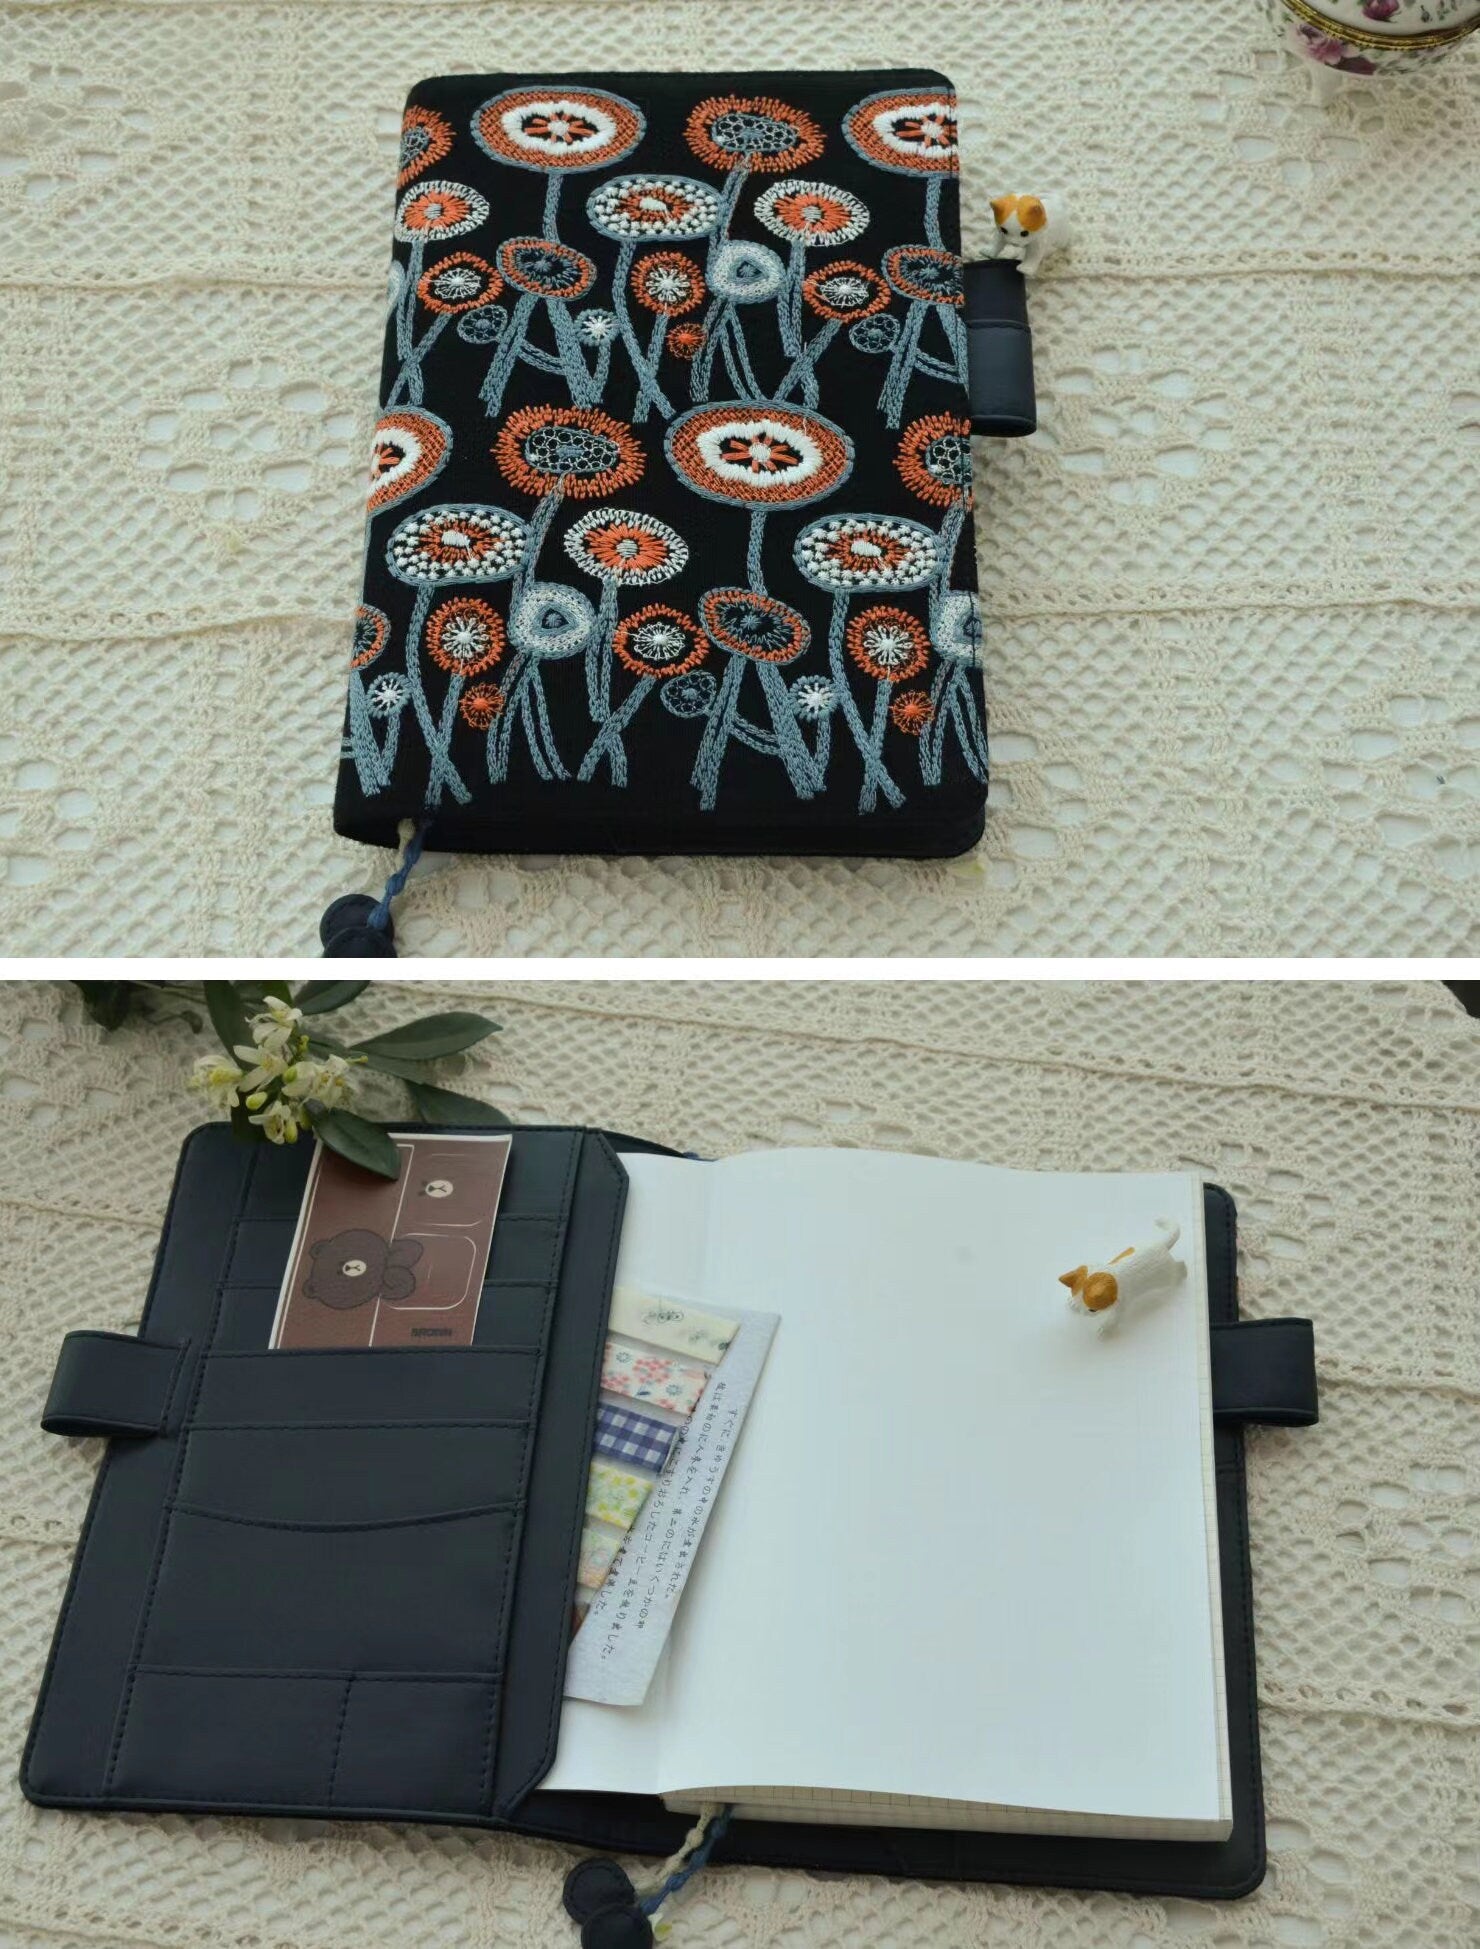 Black Trail Garden Embroidered Notebook Handmade Fabric-Leather Cover A5 A6 B6 Flower Growing Bullet Journal Sketchbook Travel Garden Gift